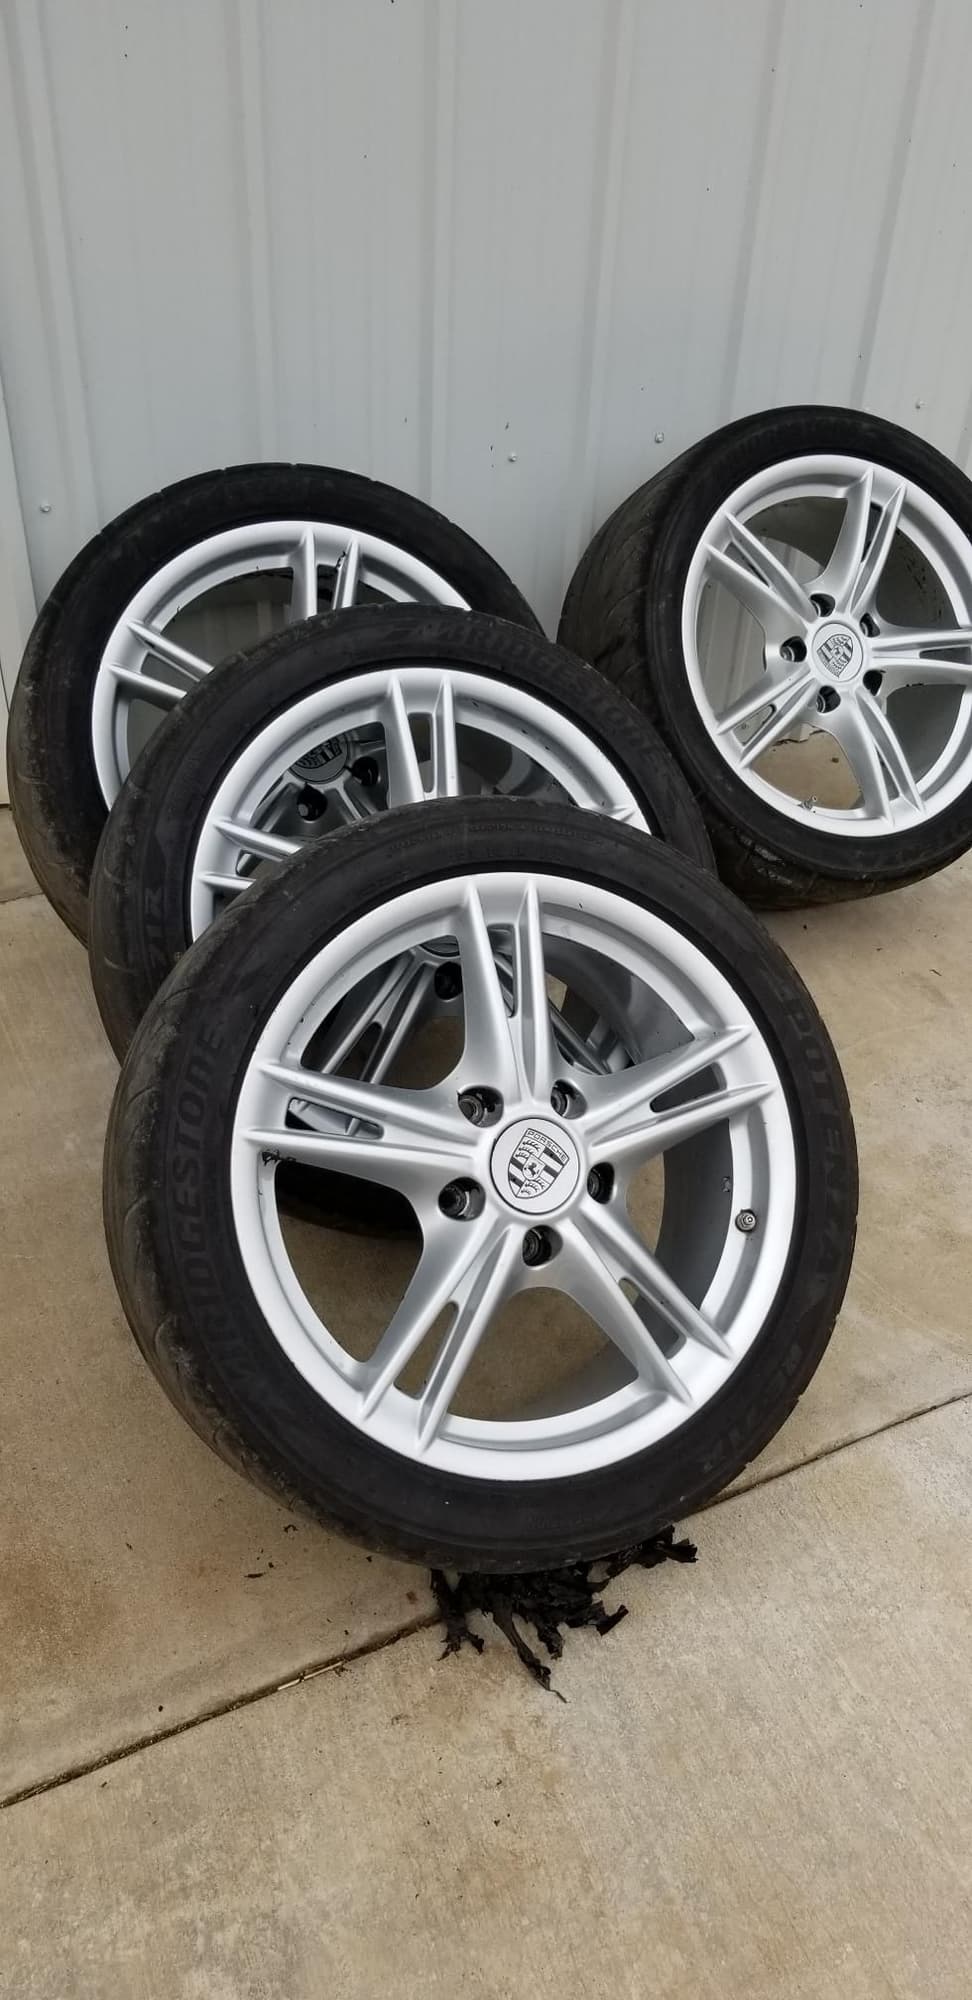 Wheels and Tires/Axles - 18" Porsche Rims Cayman Boxster 987 987.2 981 - Used - Warner, OK 74469, United States